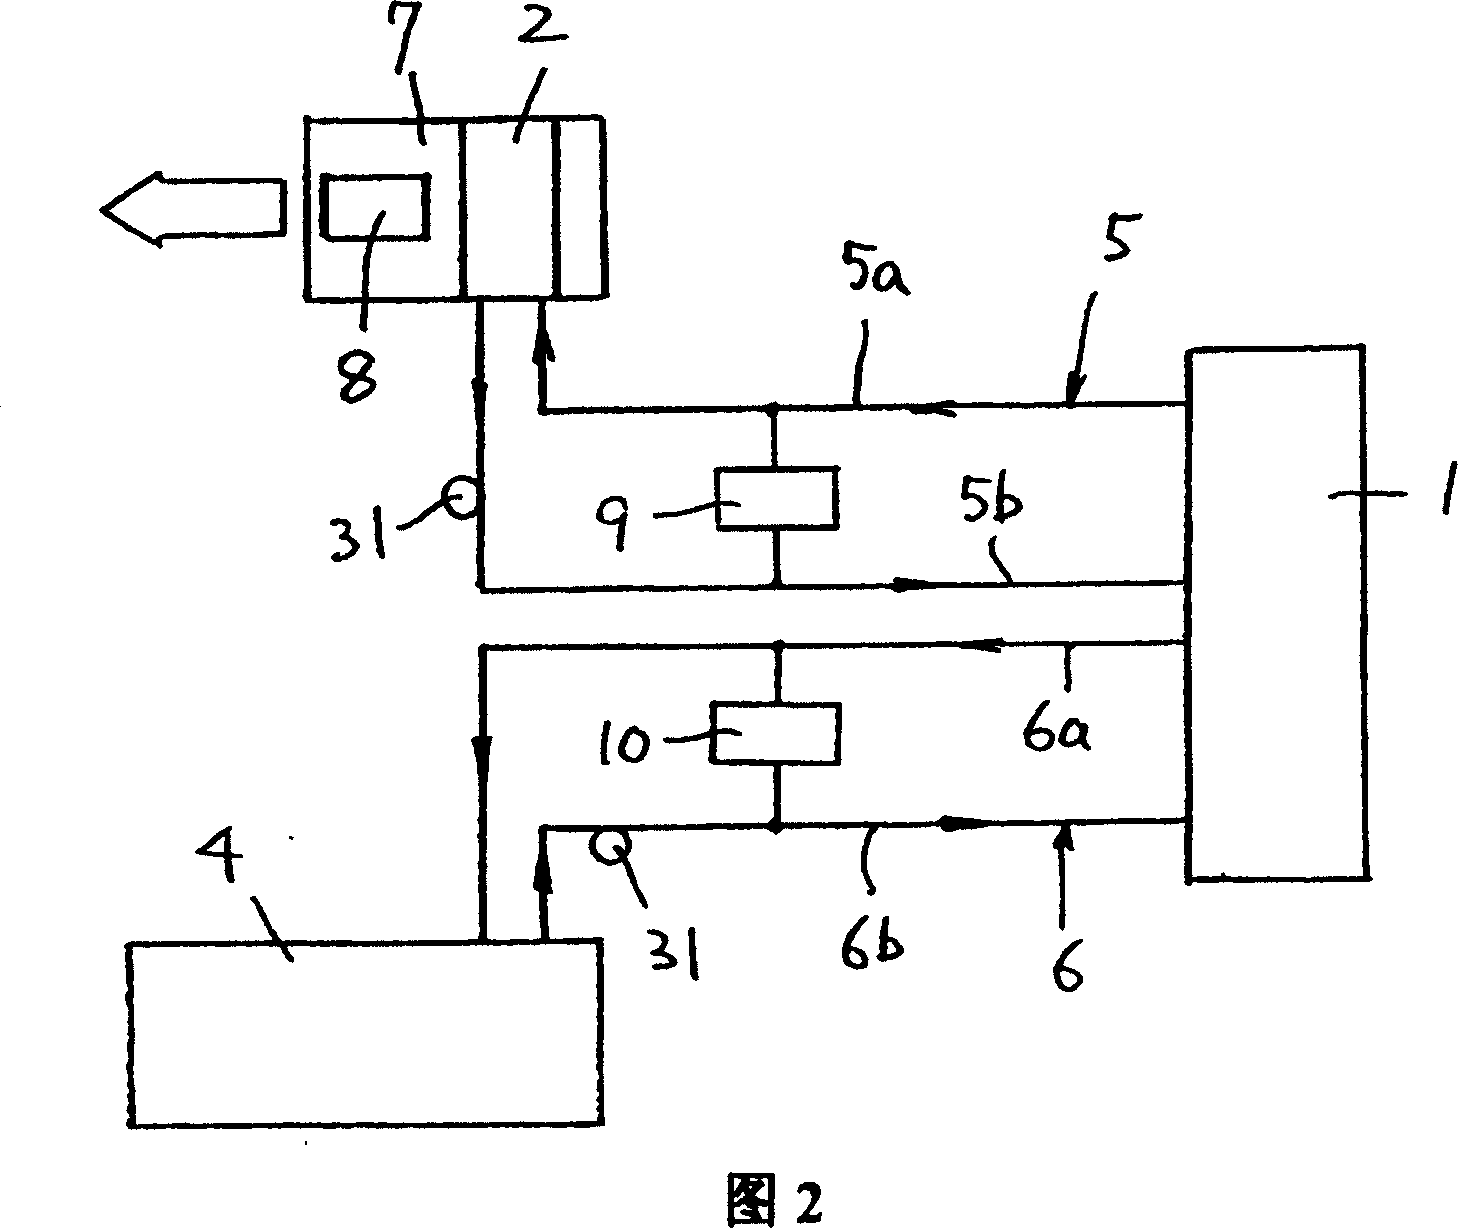 Air conditioning device with floor heating function